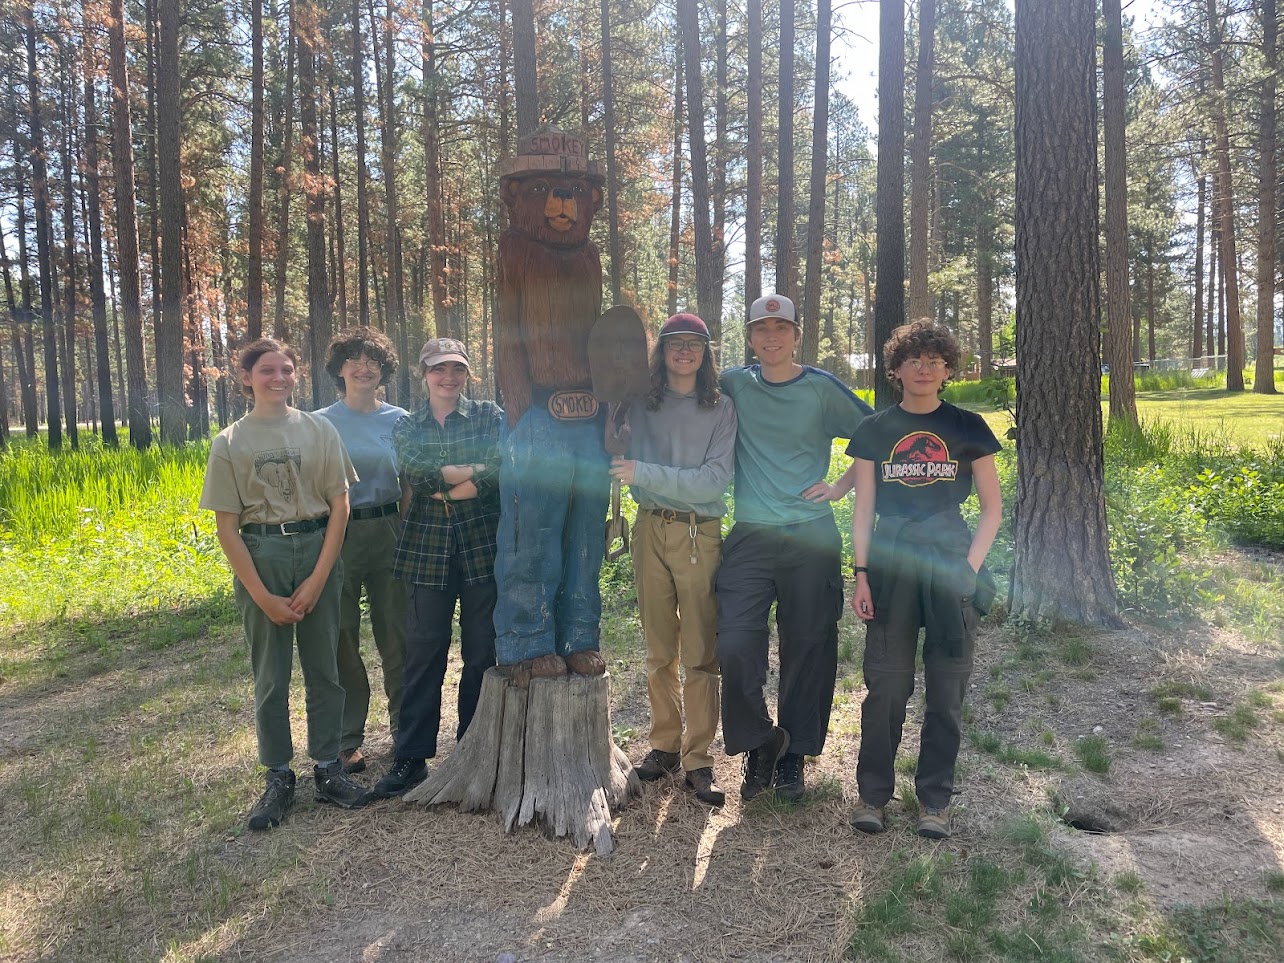 Six people standing outdoors next to a smokey bear carving. Trees in the background.